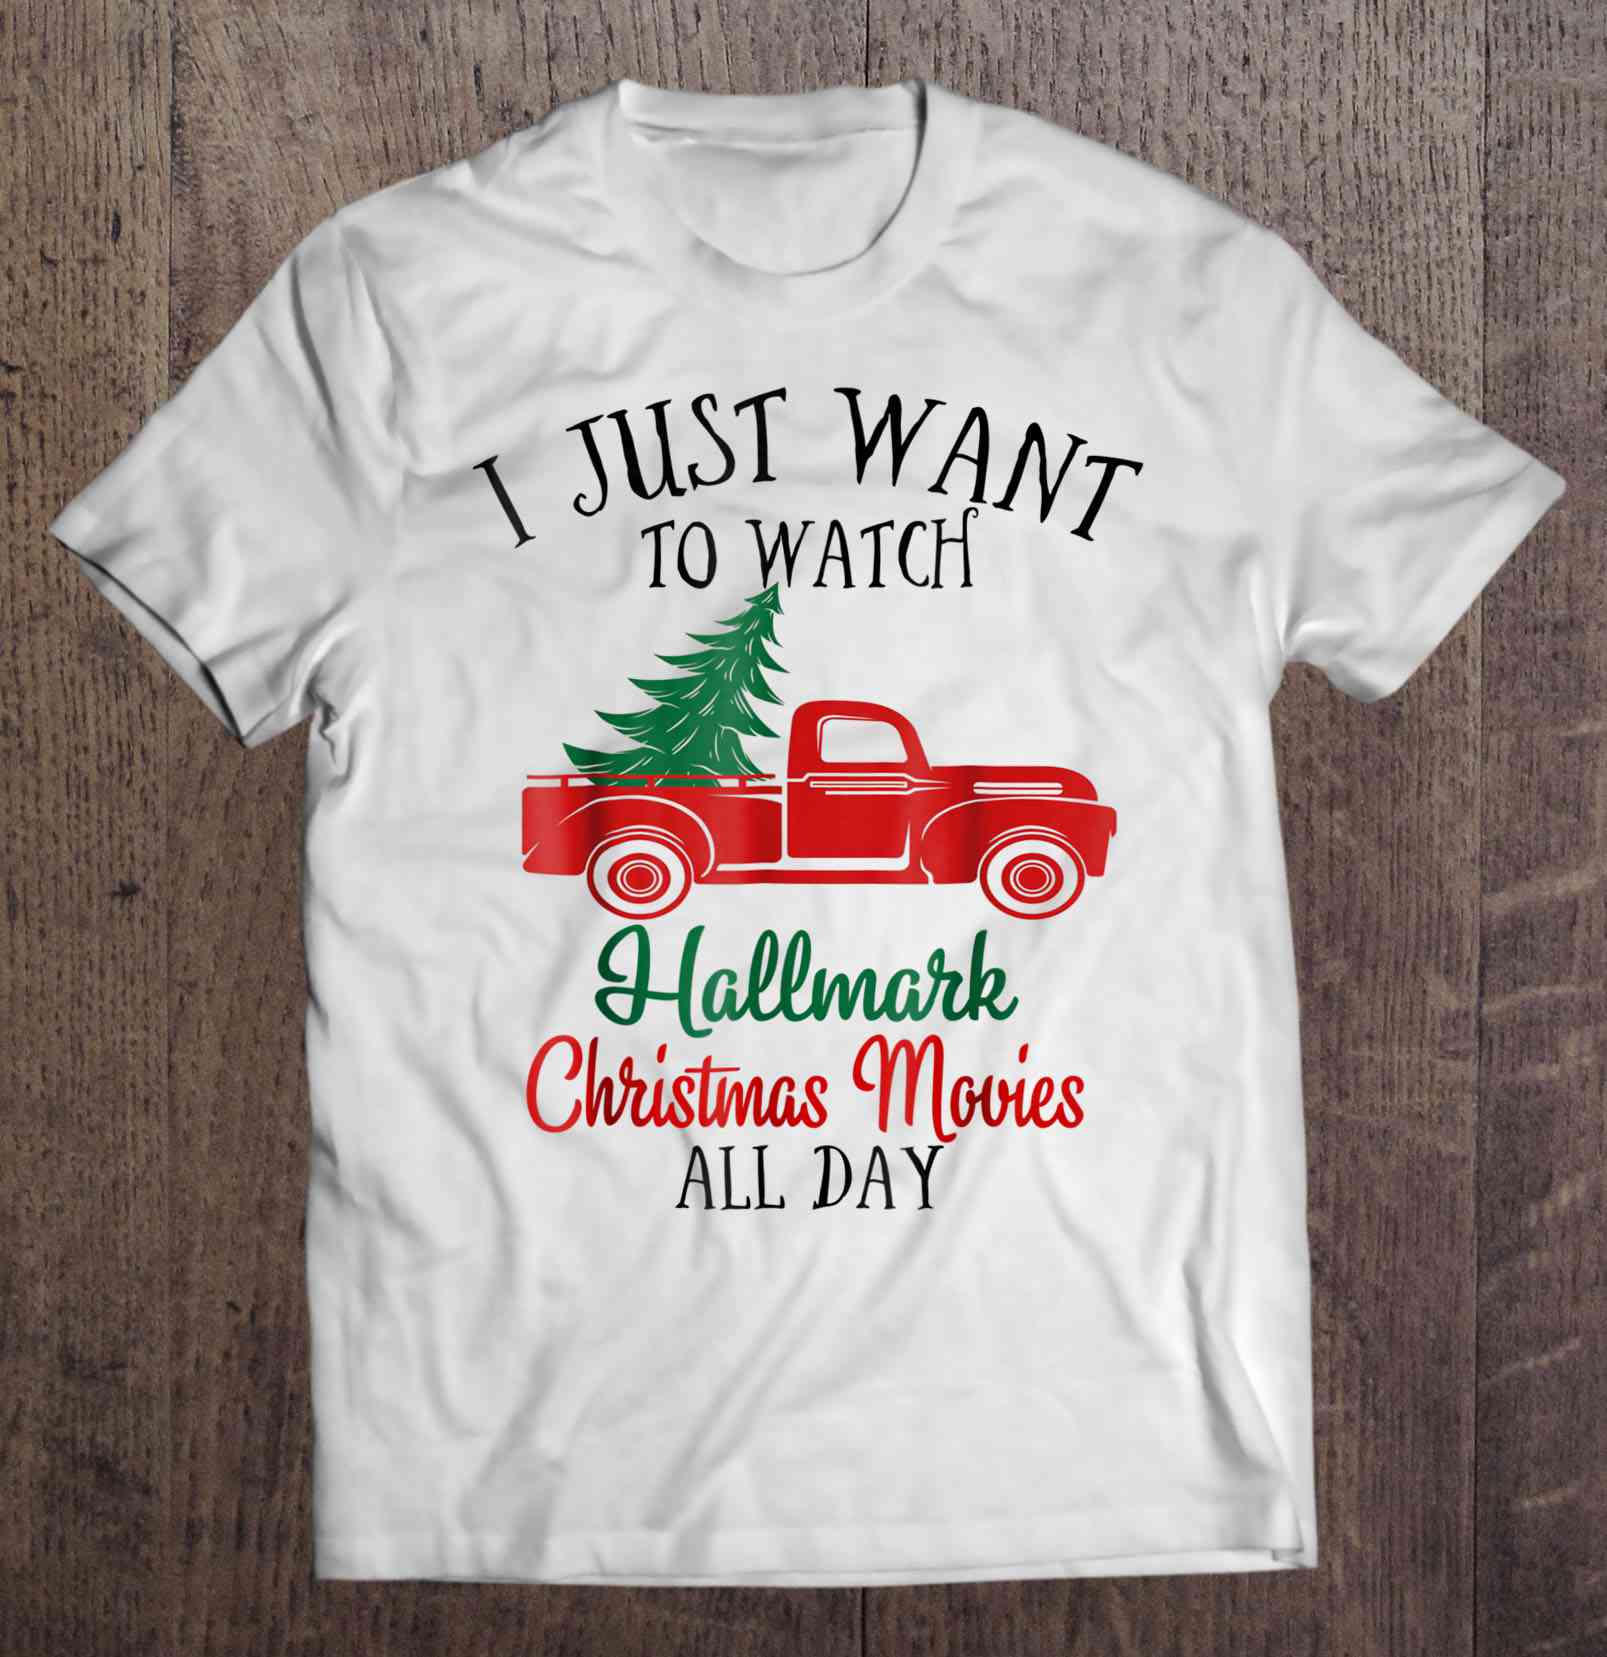 I Just Want To Watch Hallmark Christmas Movies All Day - T-shirts